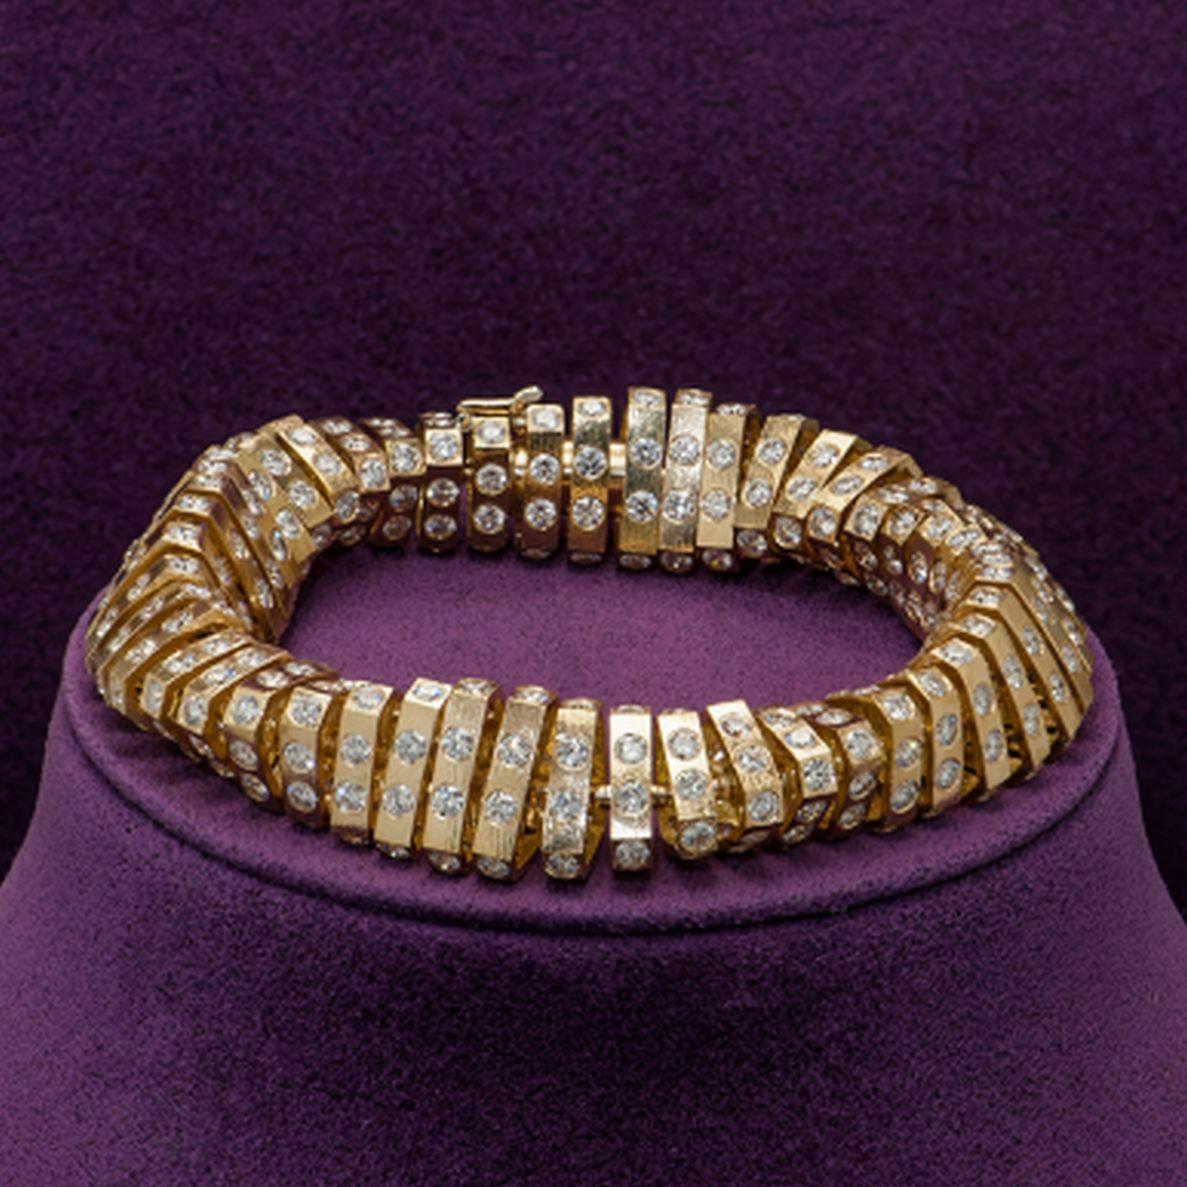 Simply Beautiful! Exclusive Diamond 18K Yellow Gold Spiral Bracelet, featuring over four hundred Brilliant cut Diamonds set into an individual element. Gently spiraling around an 18K Gold cord for a look like no other! Hand set with 432